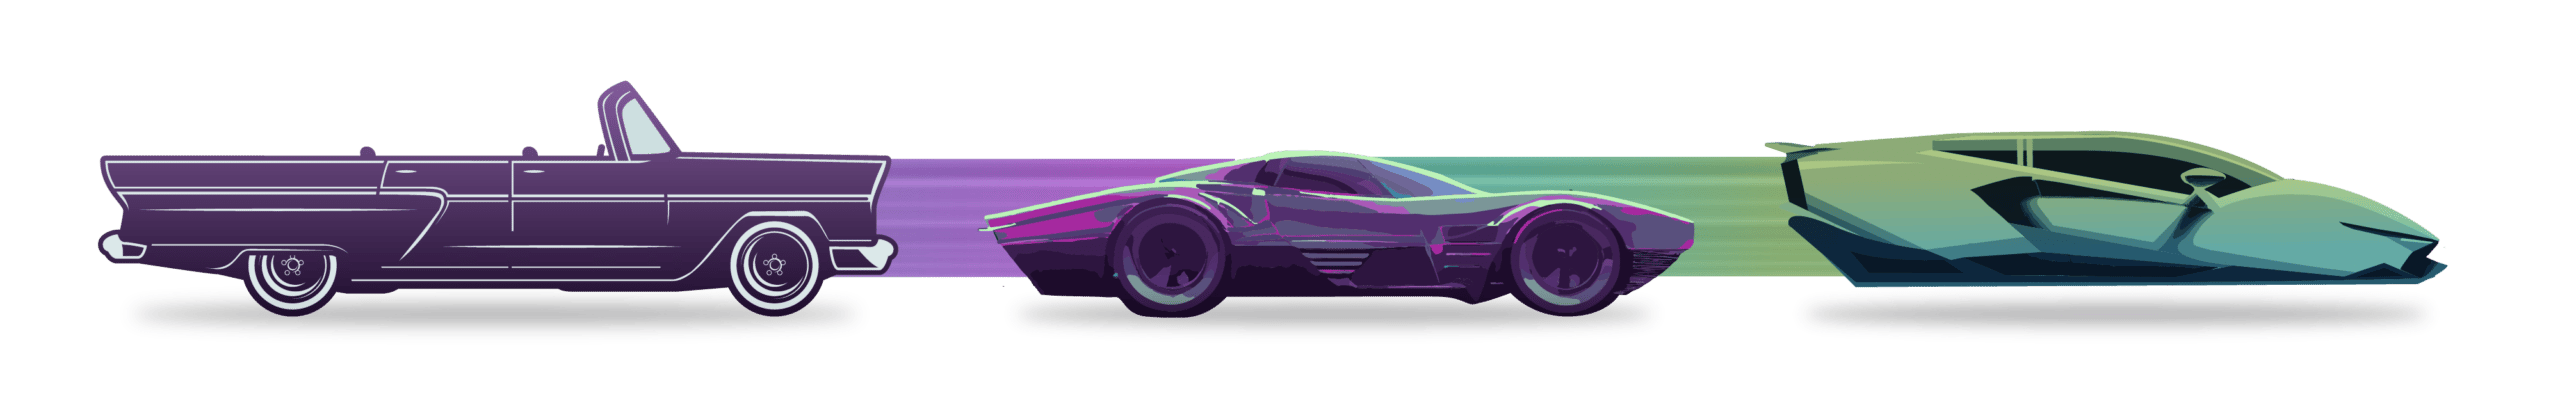 Synergex_Cars Isolated-01